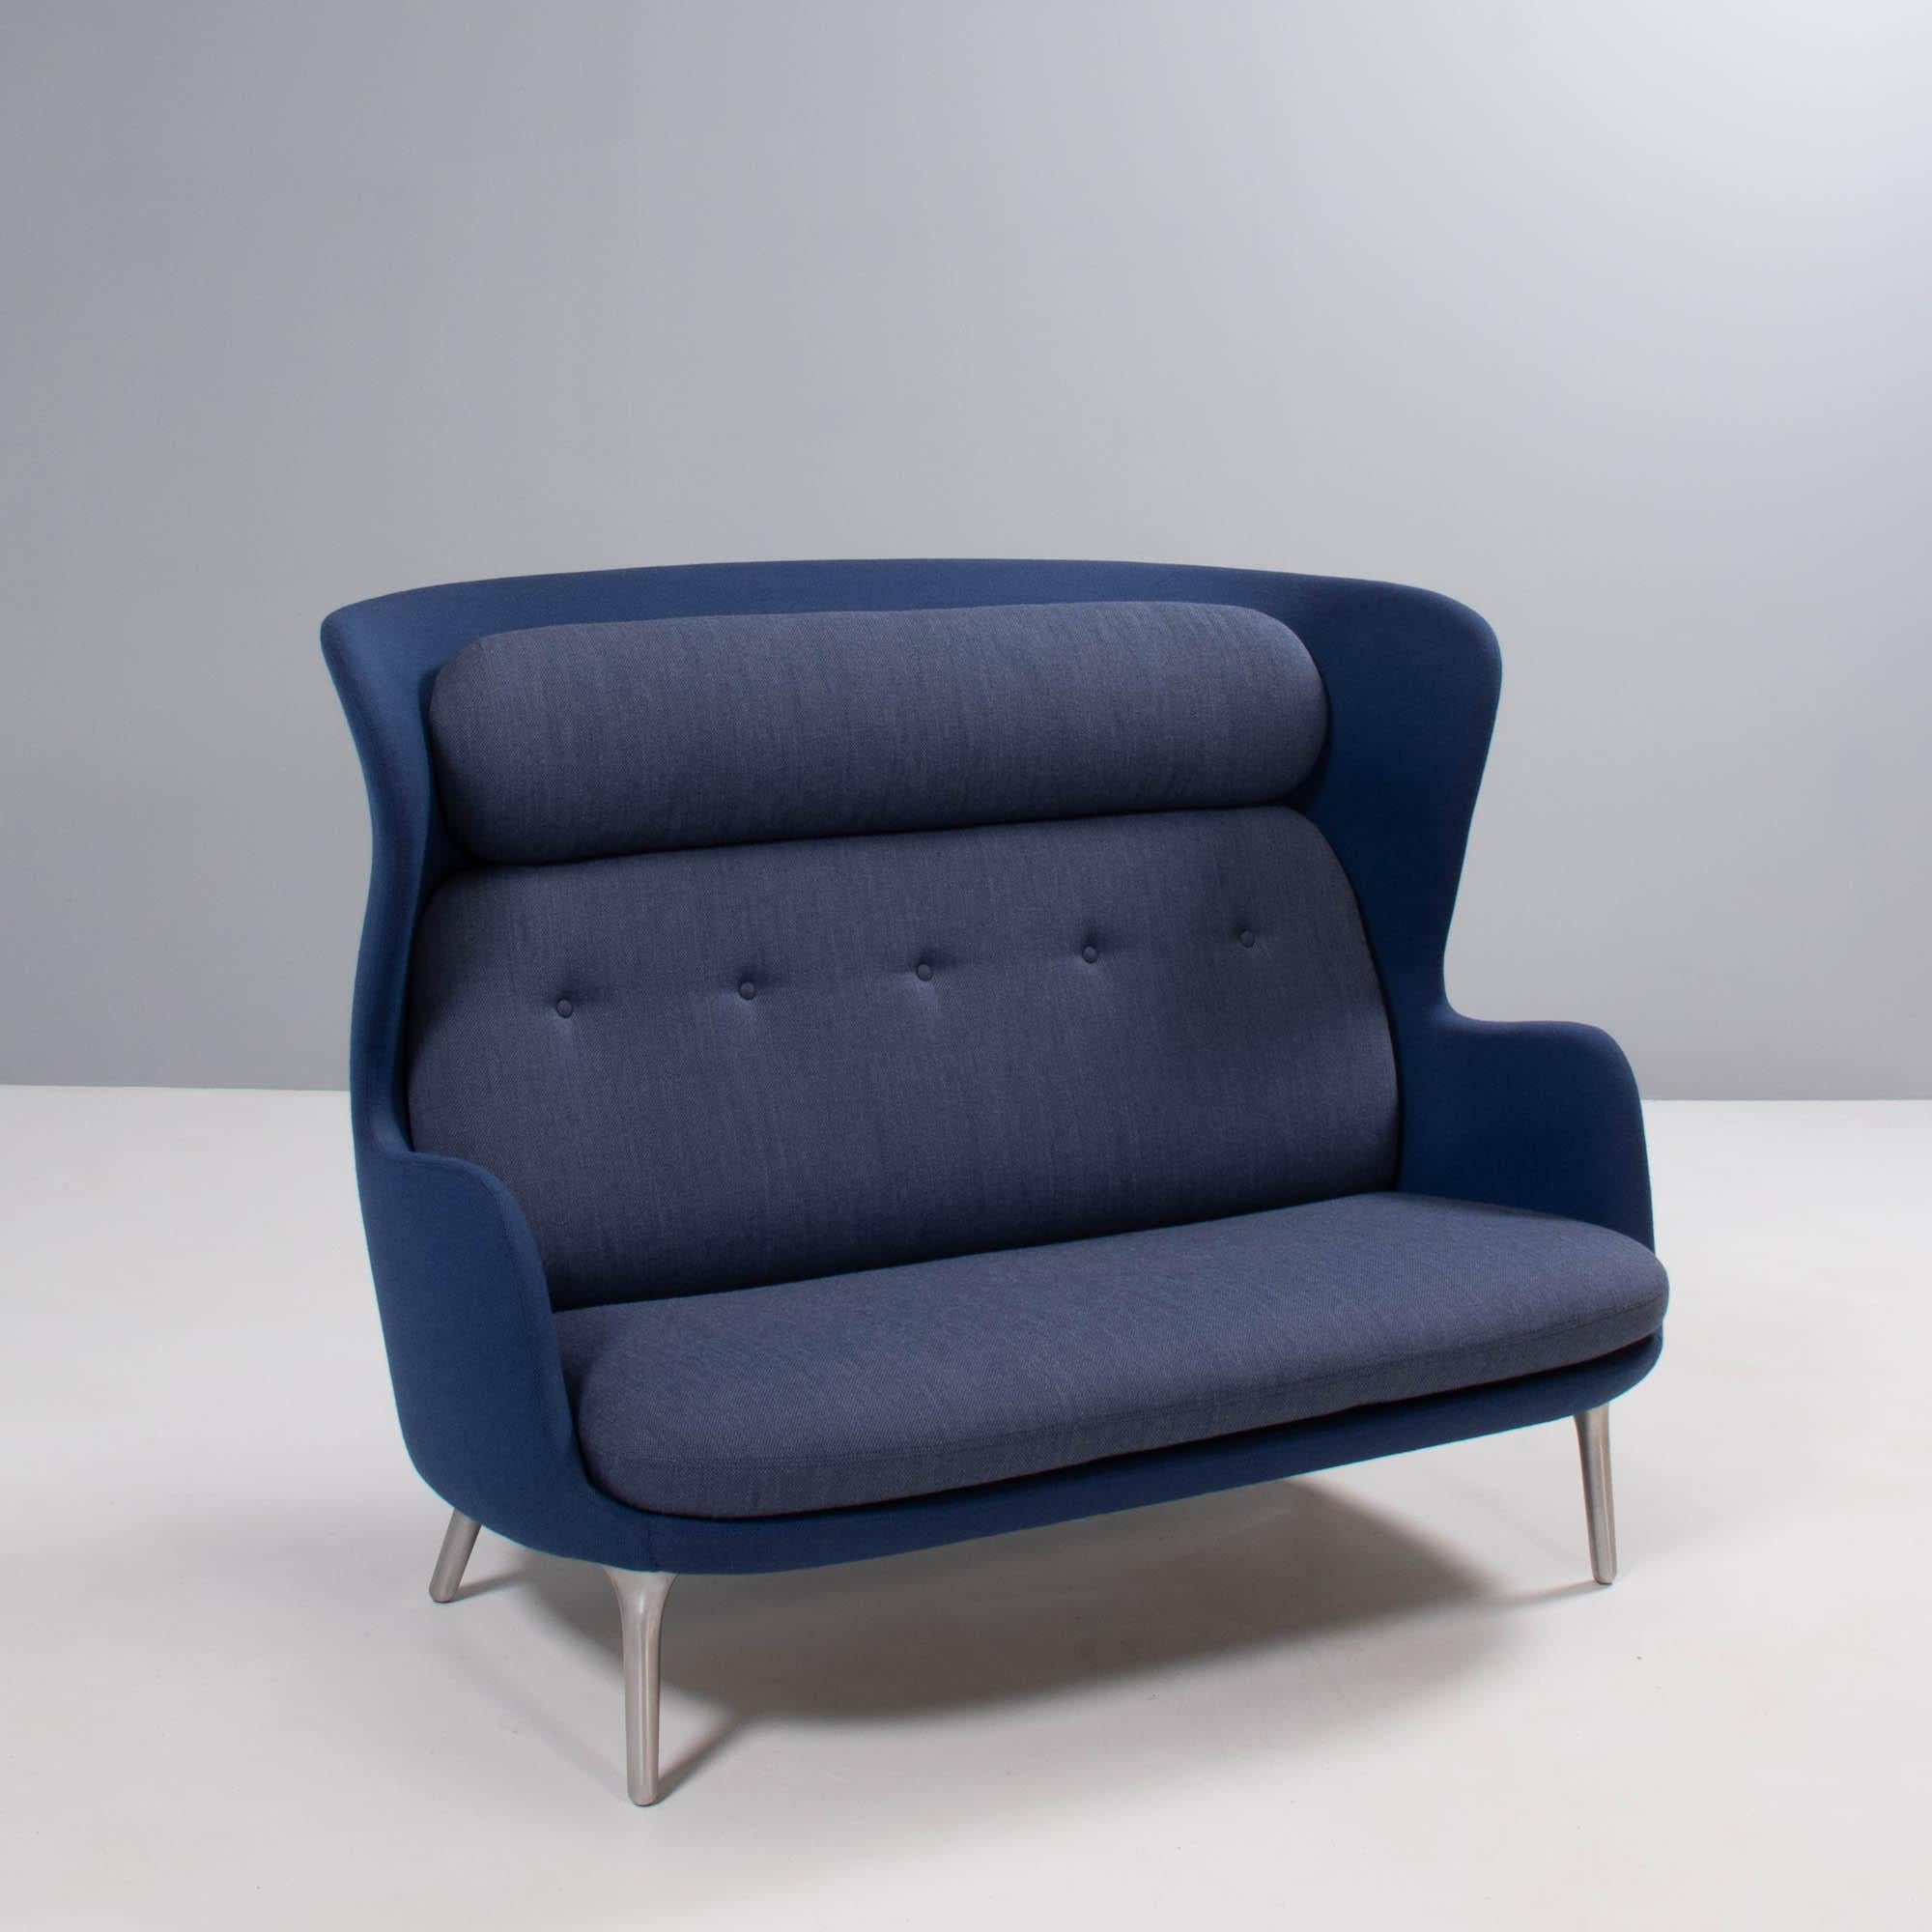 Designed by Jaime Hayon for Fritz Hansen, the RO sofa is named after the Danish word for ‘tranquility’.

The soft curves of the sofa combined with the high backrest creates a cocoon like environment.

The shell of the sofa is upholstered in blue